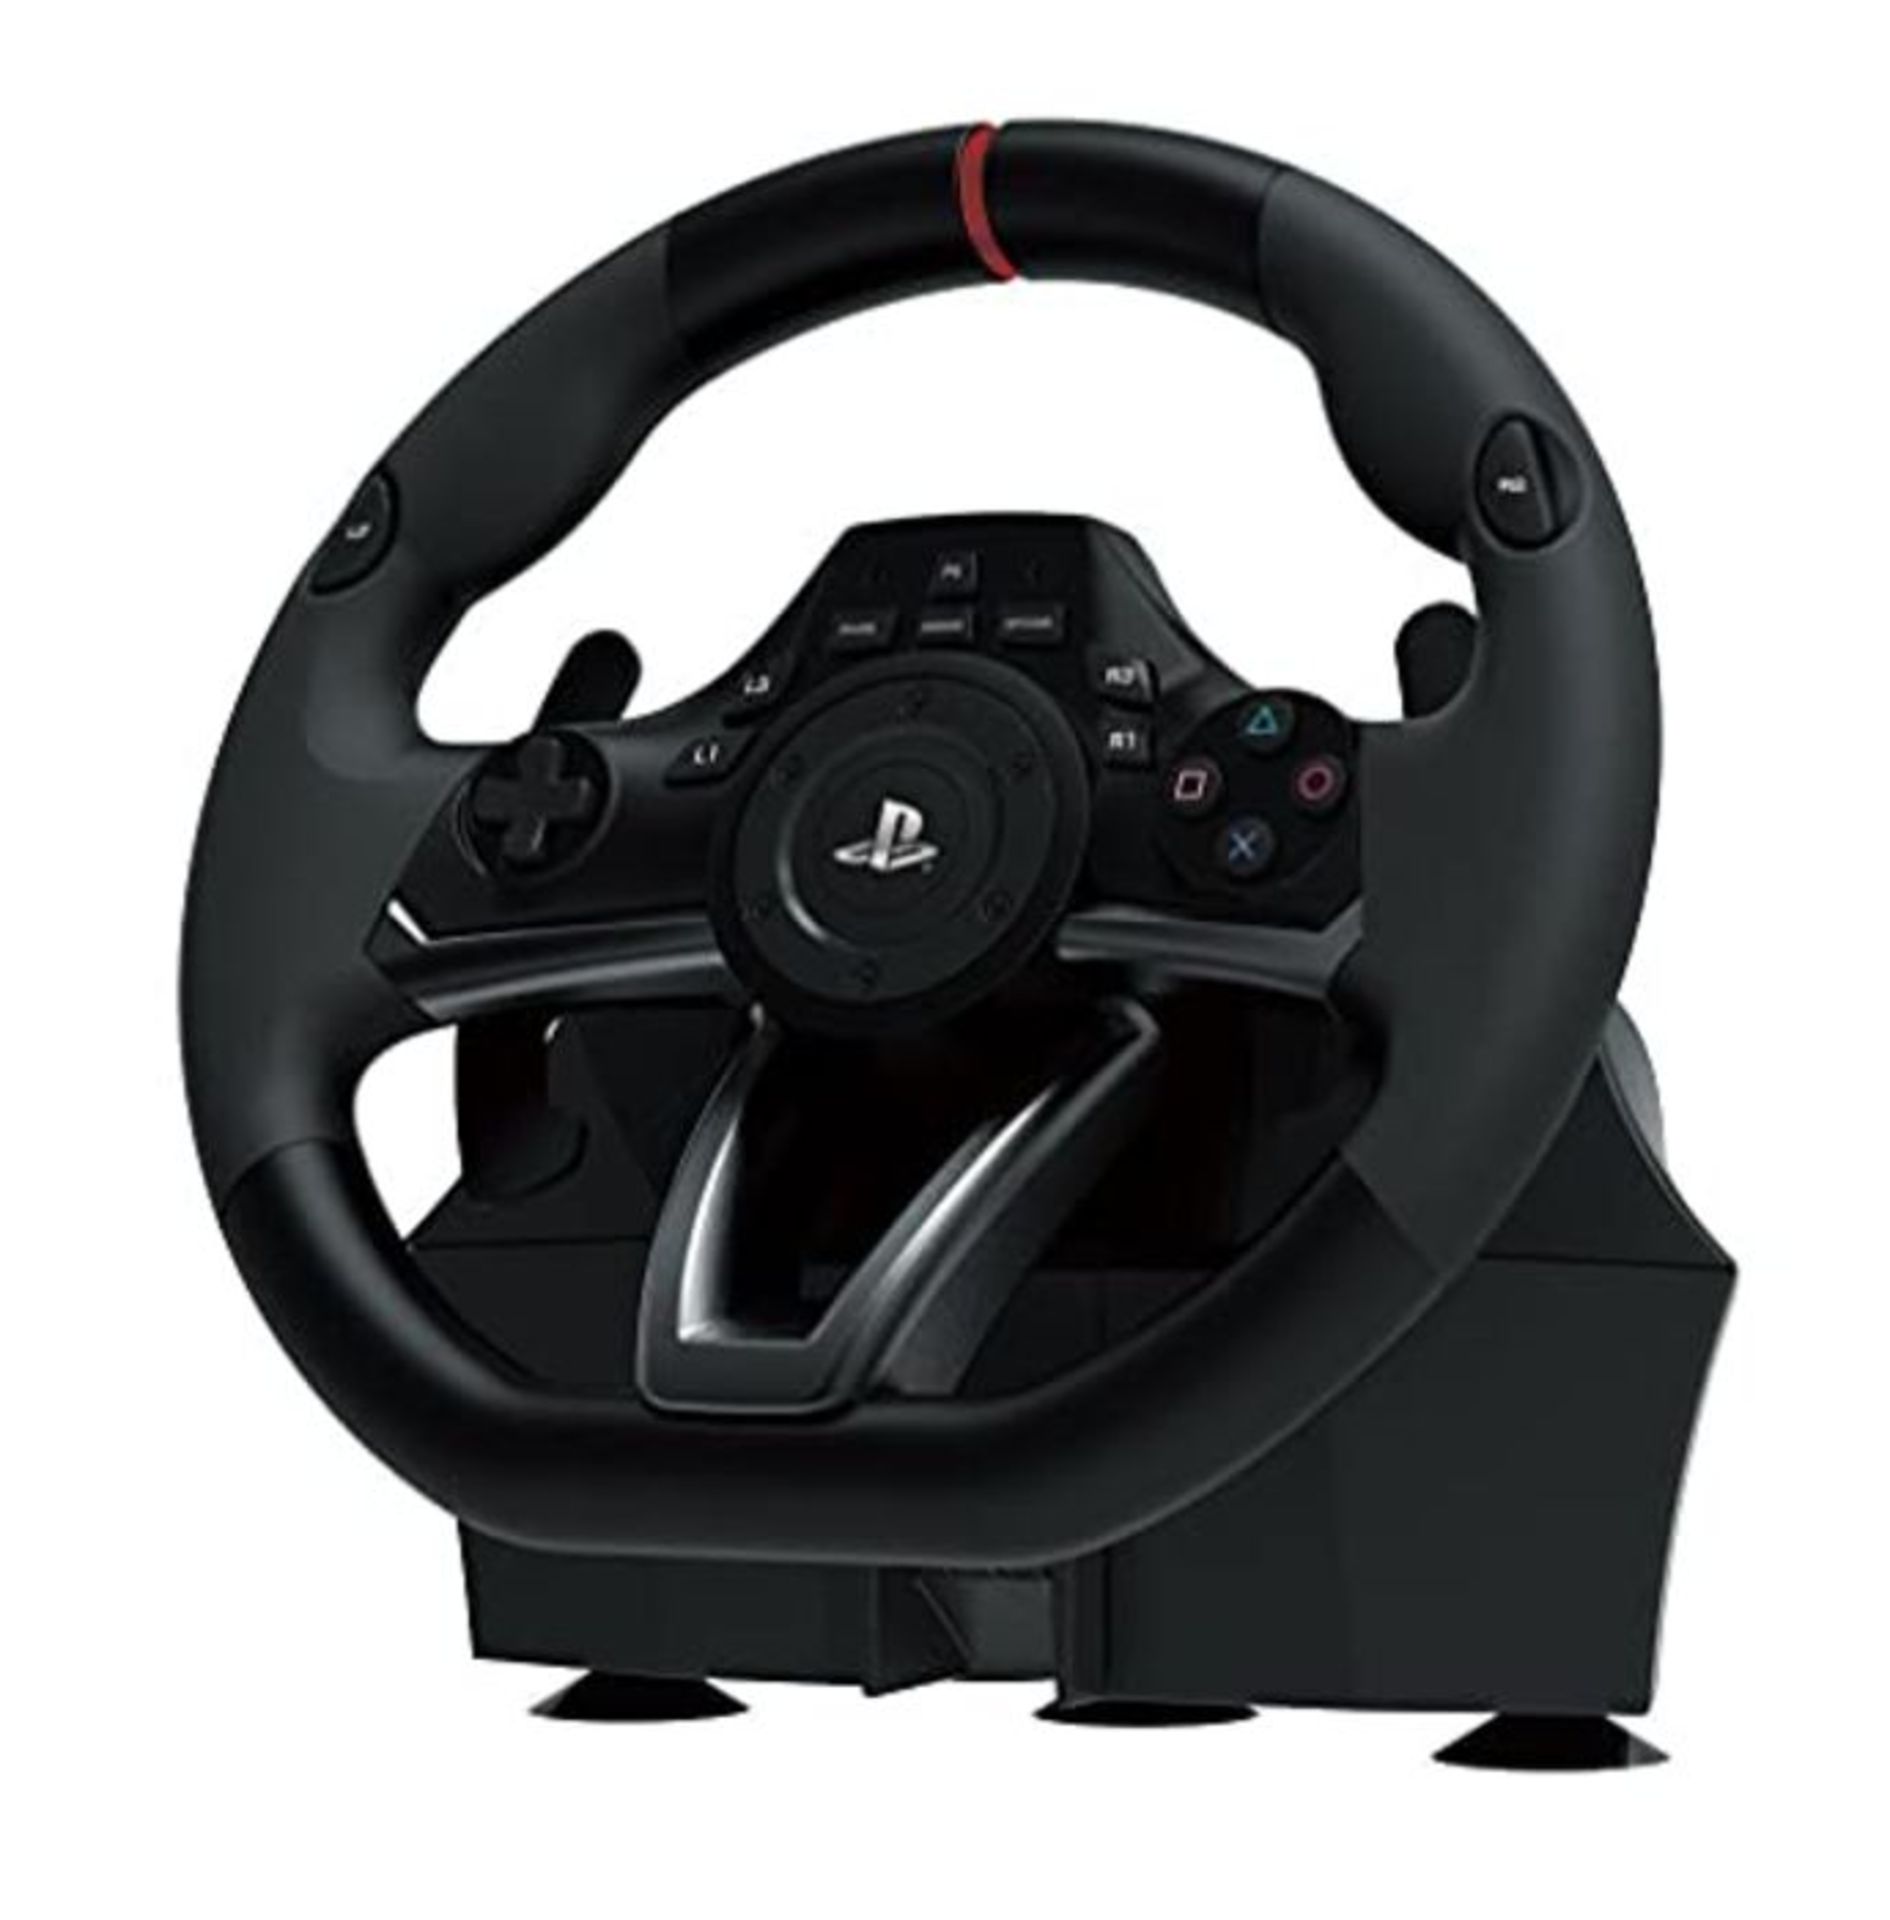 RRP £68.00 RWA Racing Wheel Apex controller for PS4 and PS3 Officially Licensed by Sony - PlaySta